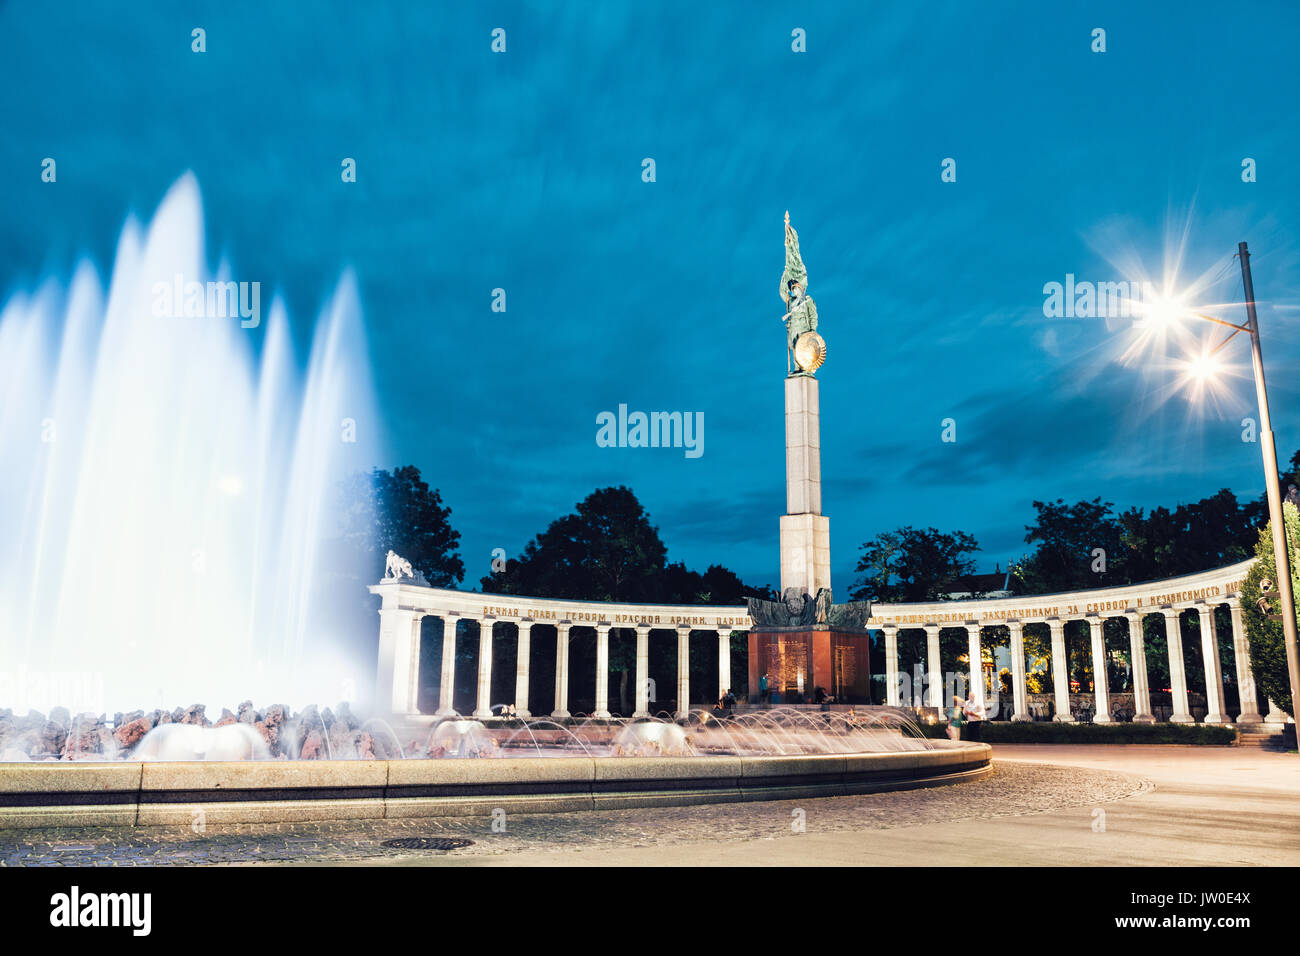 Heroes monument of the Red Army in Vienna, Austria at night Stock Photo